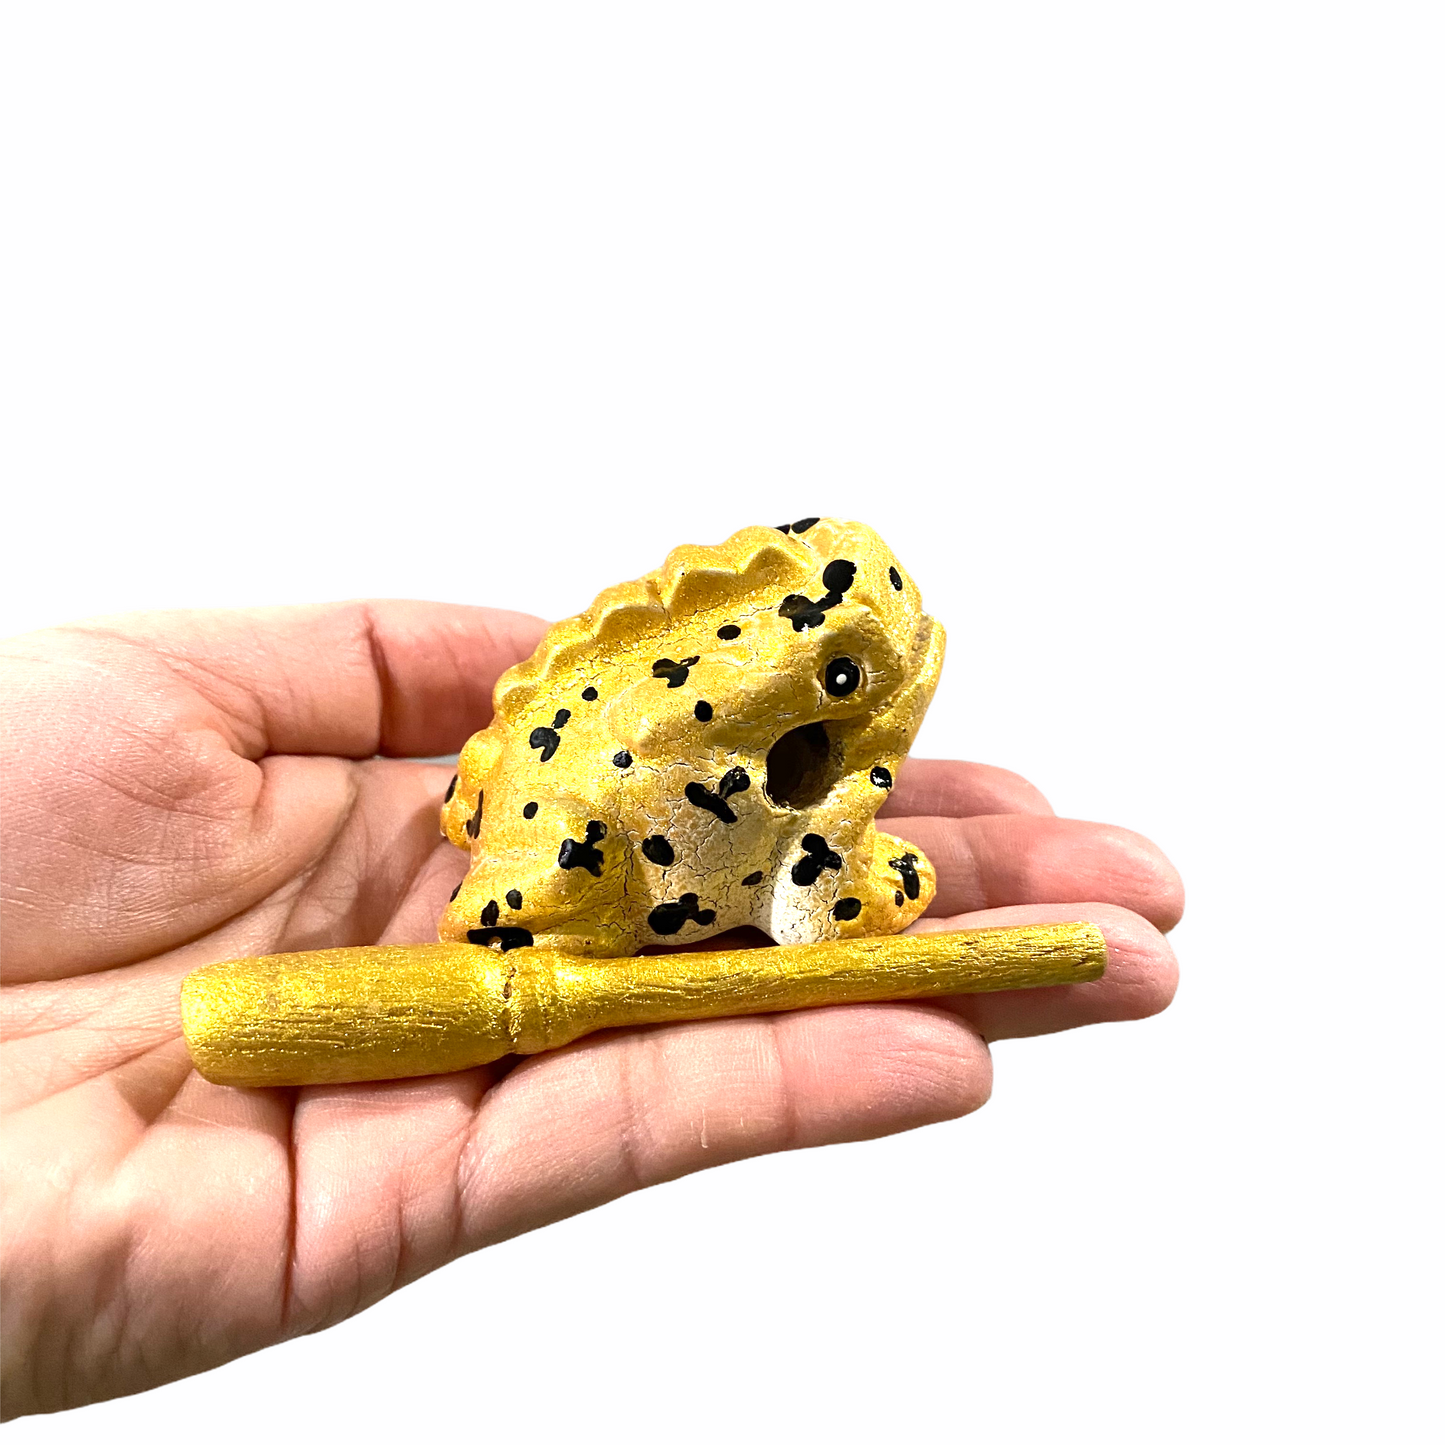 1.5" Extra Small Painted Golden Wooden Musical Frog Percussion Instrument